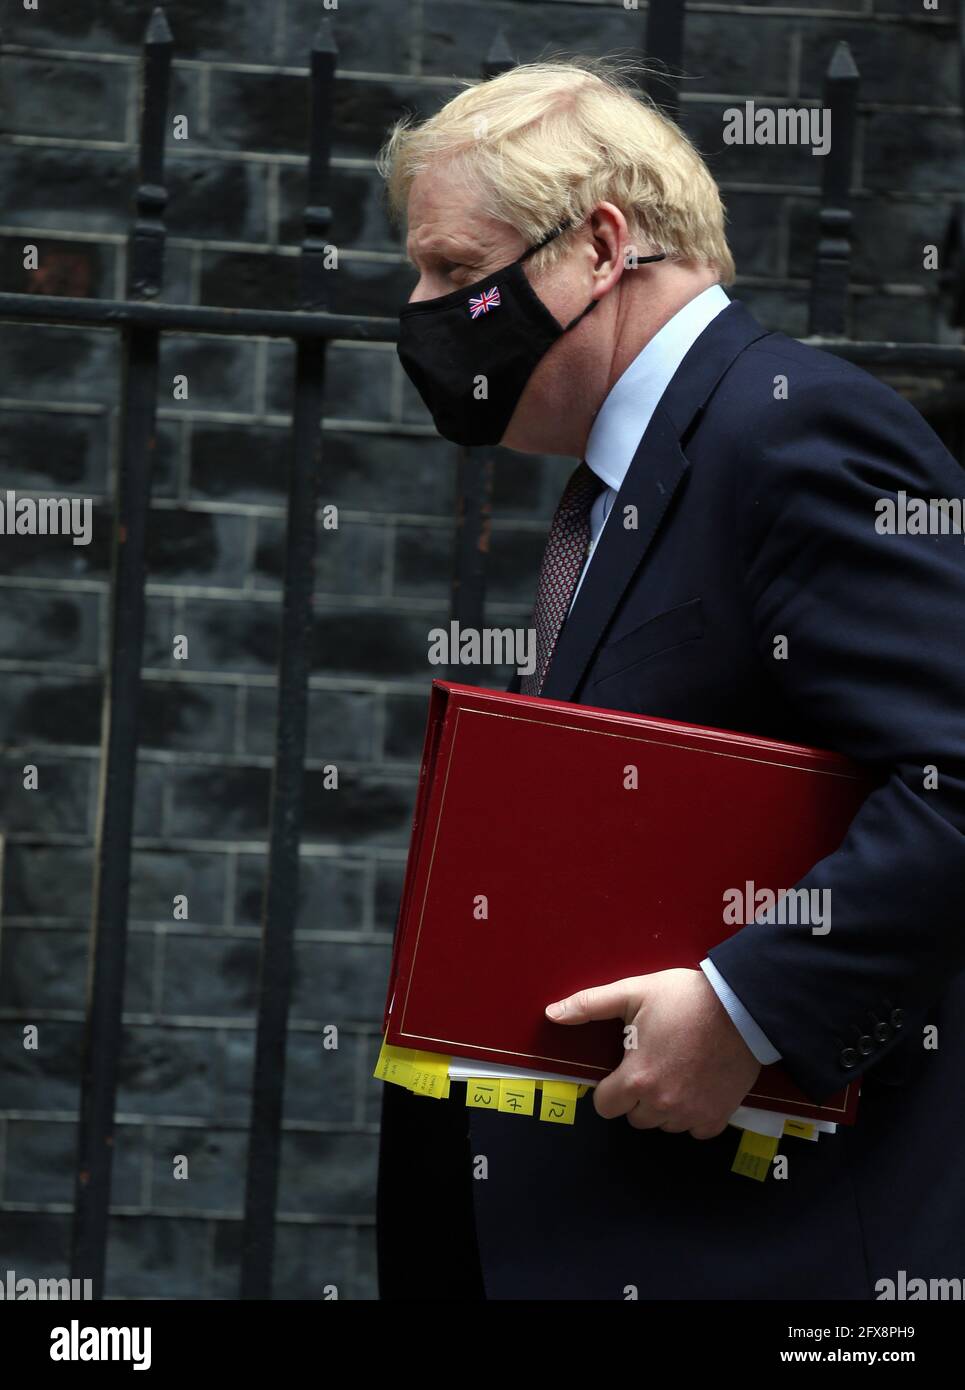 London, England, UK. 26th May, 2021. UK Prime Minister BORIS JOHNSON leaves 10 Downing Street ahead of the weekly Prime Minister's Questions session in the House of Commons as his former chief adviser Dominic Cummings testifies against his government in the joint inquiry of the Health and Social Care Committee and Science and Technology Committee on coronavirus pandemic response. Credit: Tayfun Salci/ZUMA Wire/Alamy Live News Stock Photo